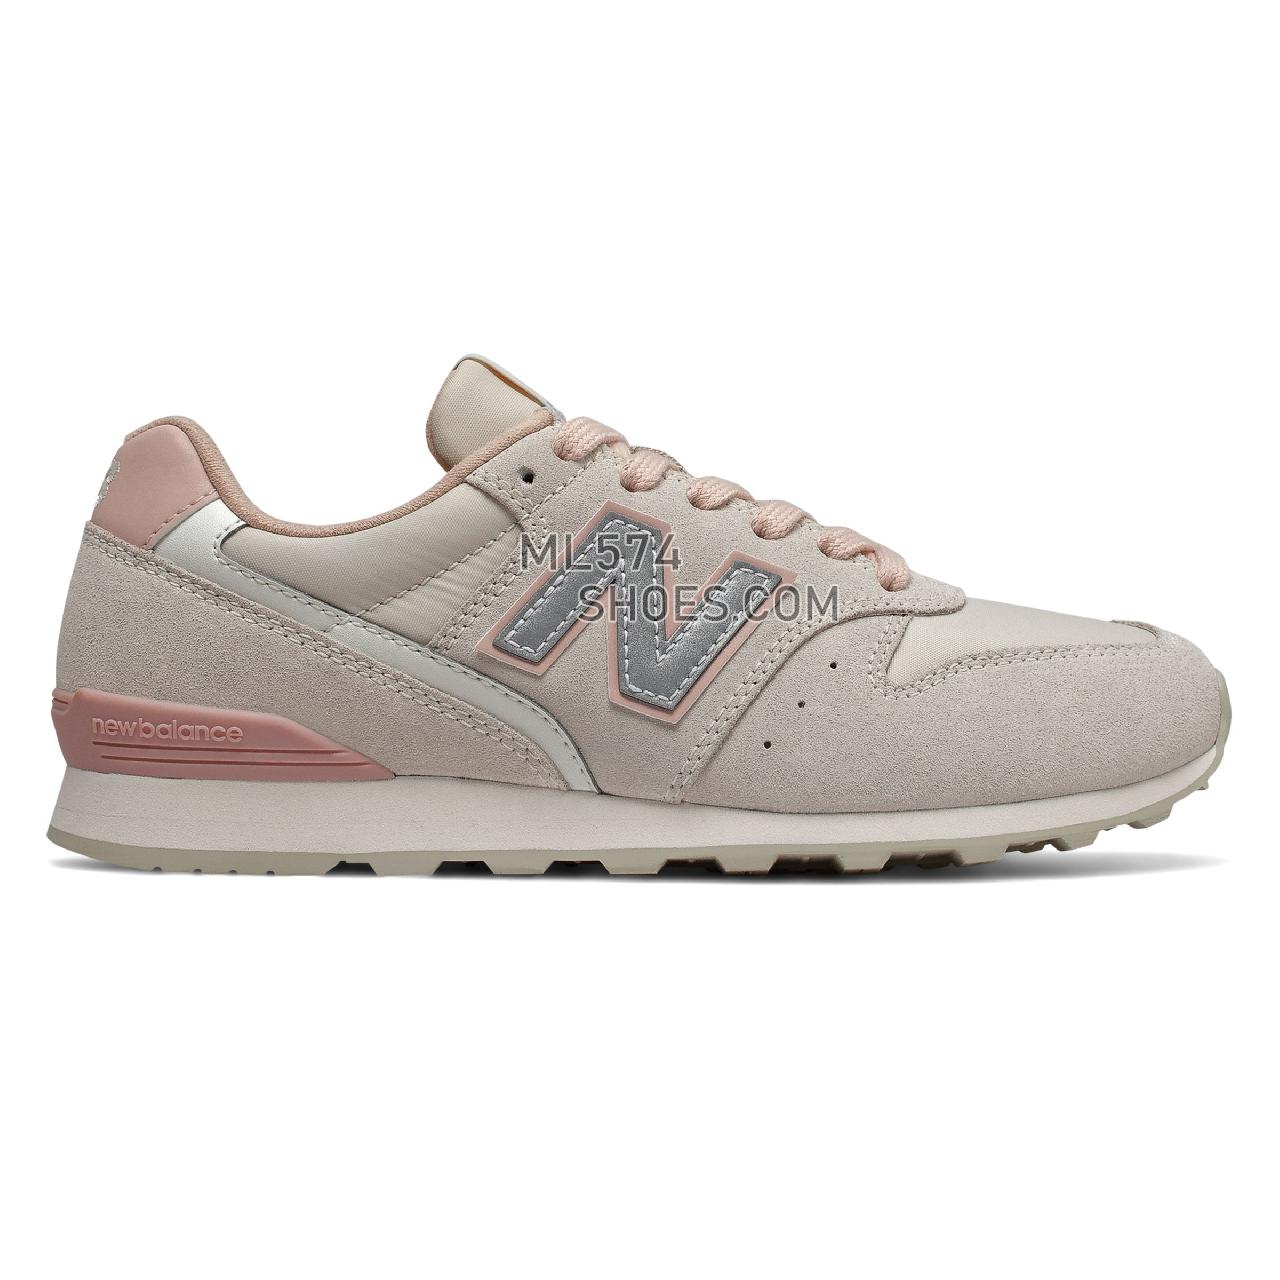 New Balance 996 - Women's Classic Sneakers - Oyster with White Oak - WL996AA